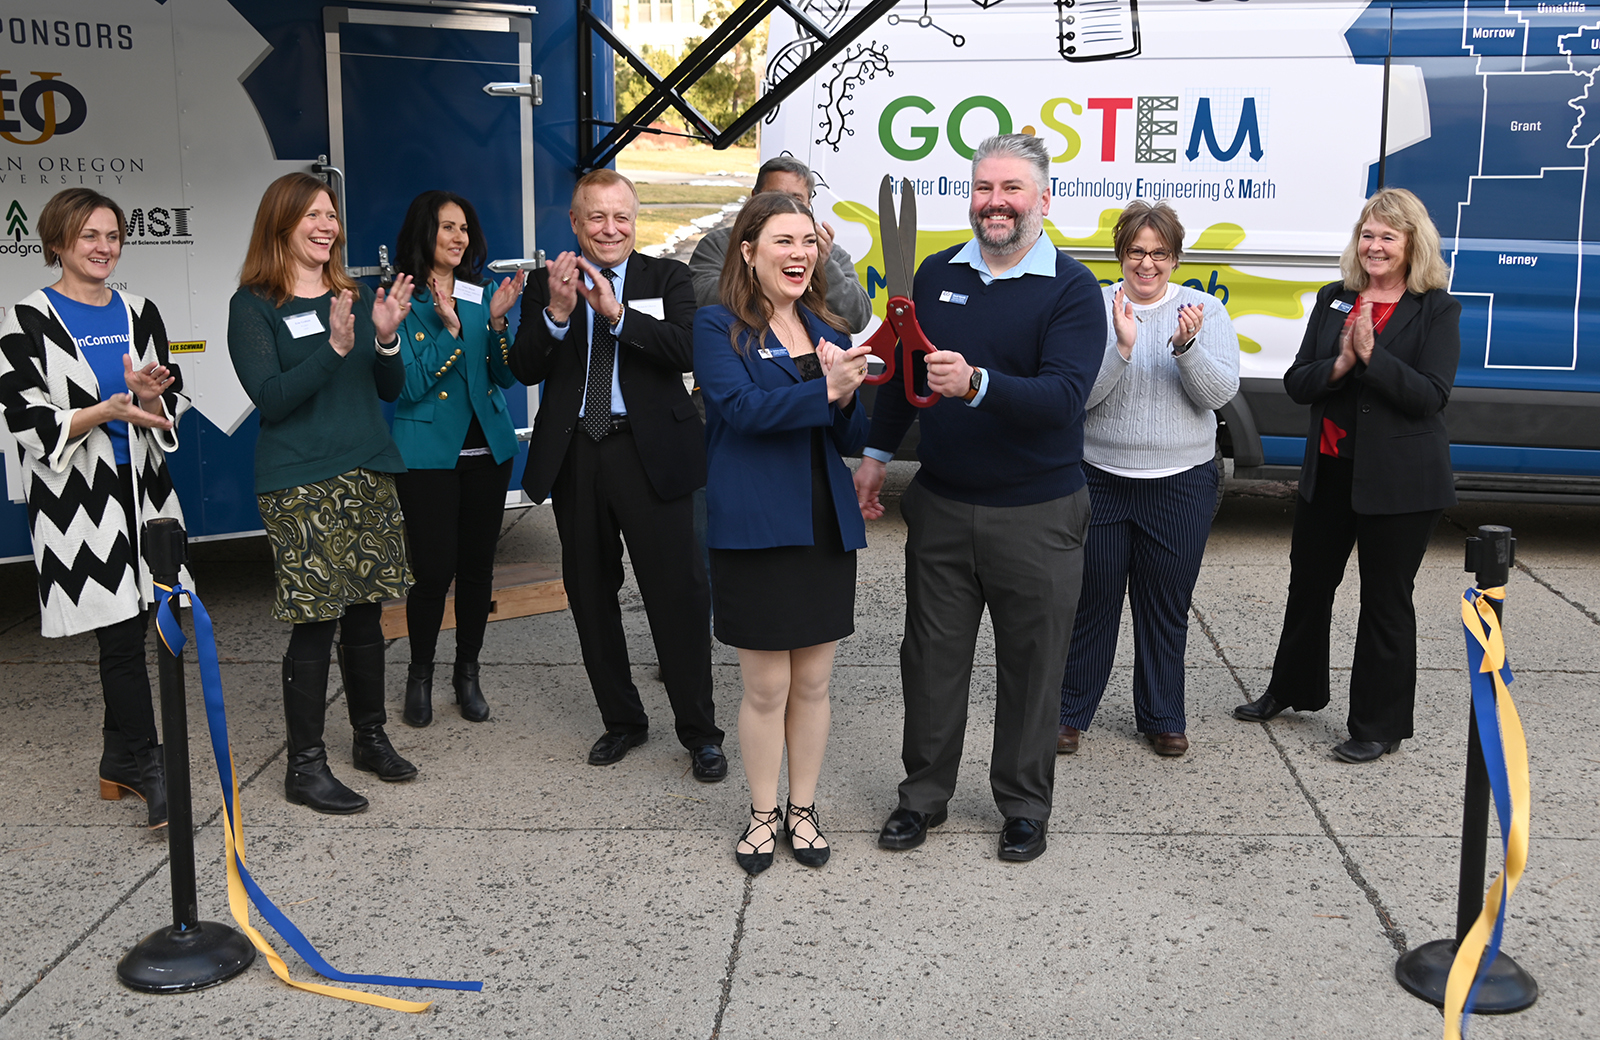 Stefanie Holloway, GO STEM Program Director (Left) and David Melville, GO STEM Executive Director (Right) officially launch the Mobile Maker Lab.